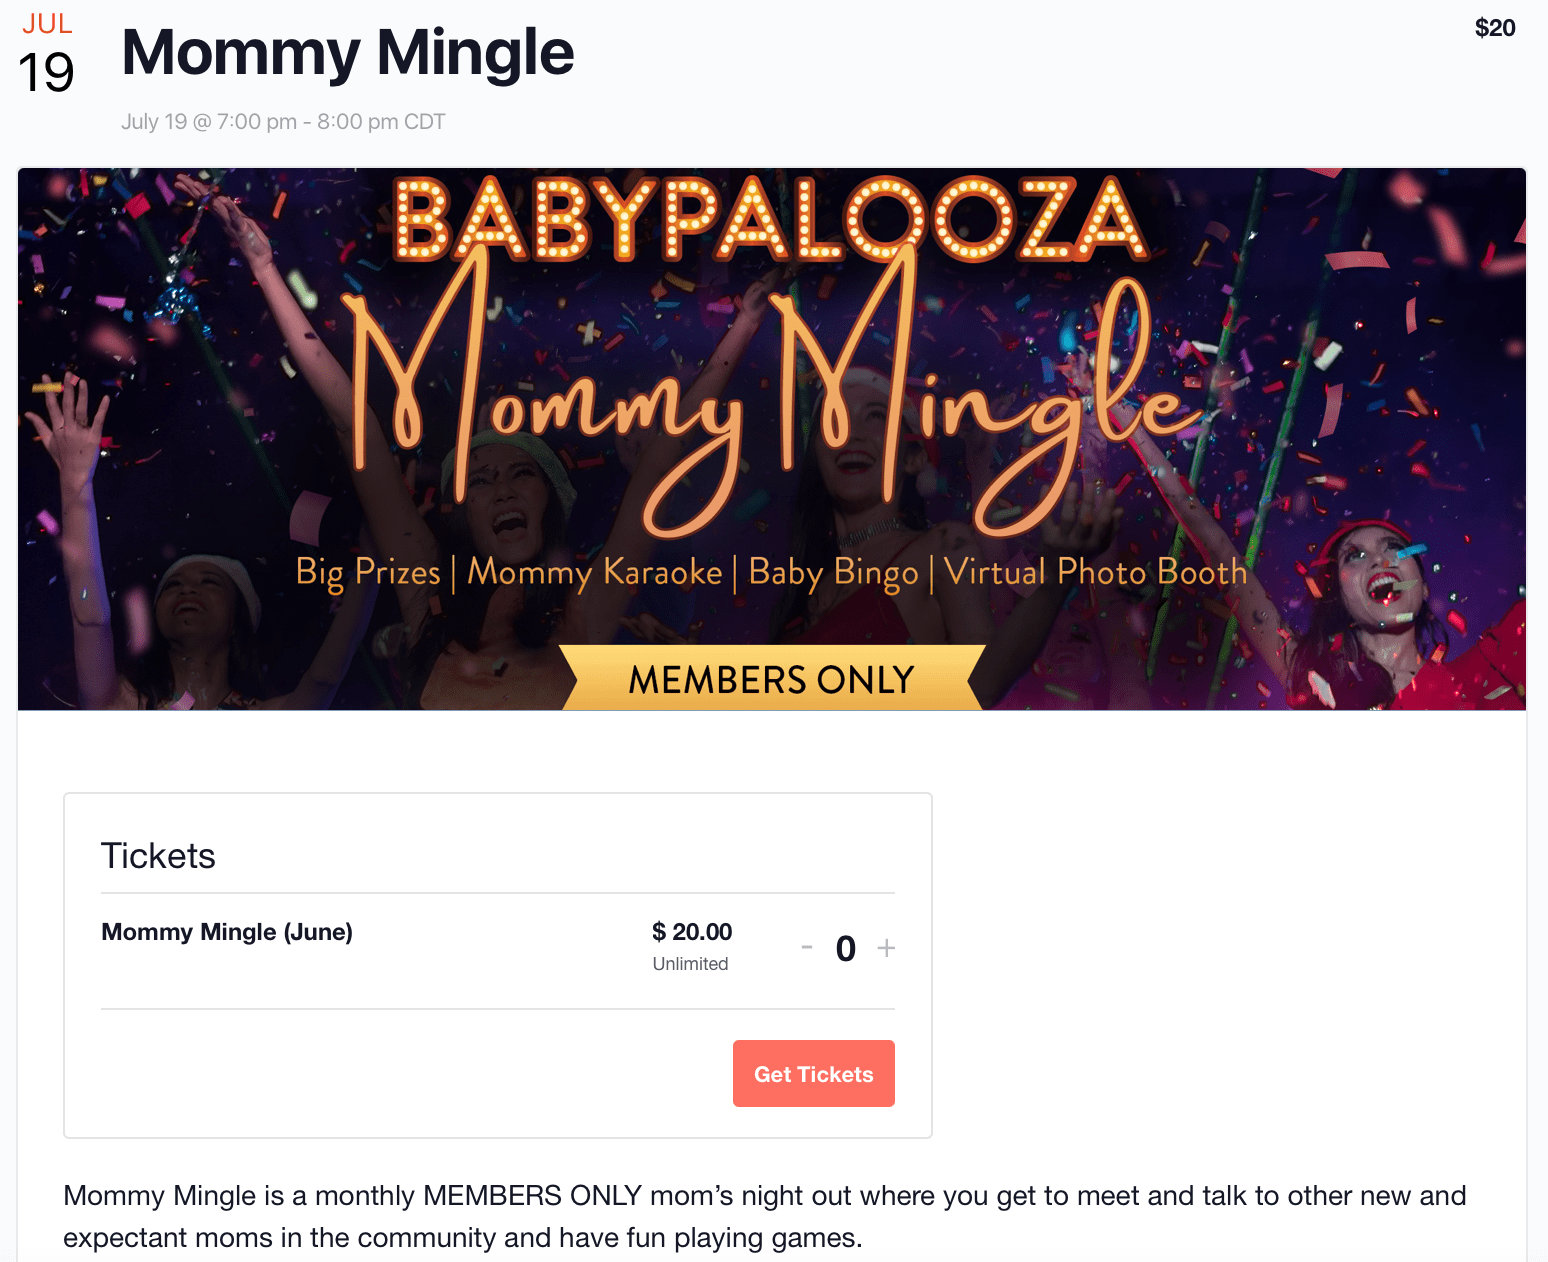 Th event page. There is a large header that says mommy mingle on it. There is a tickets form below that with a single ticket available for 20 dollars. There is an orange button to purchase the ticket.